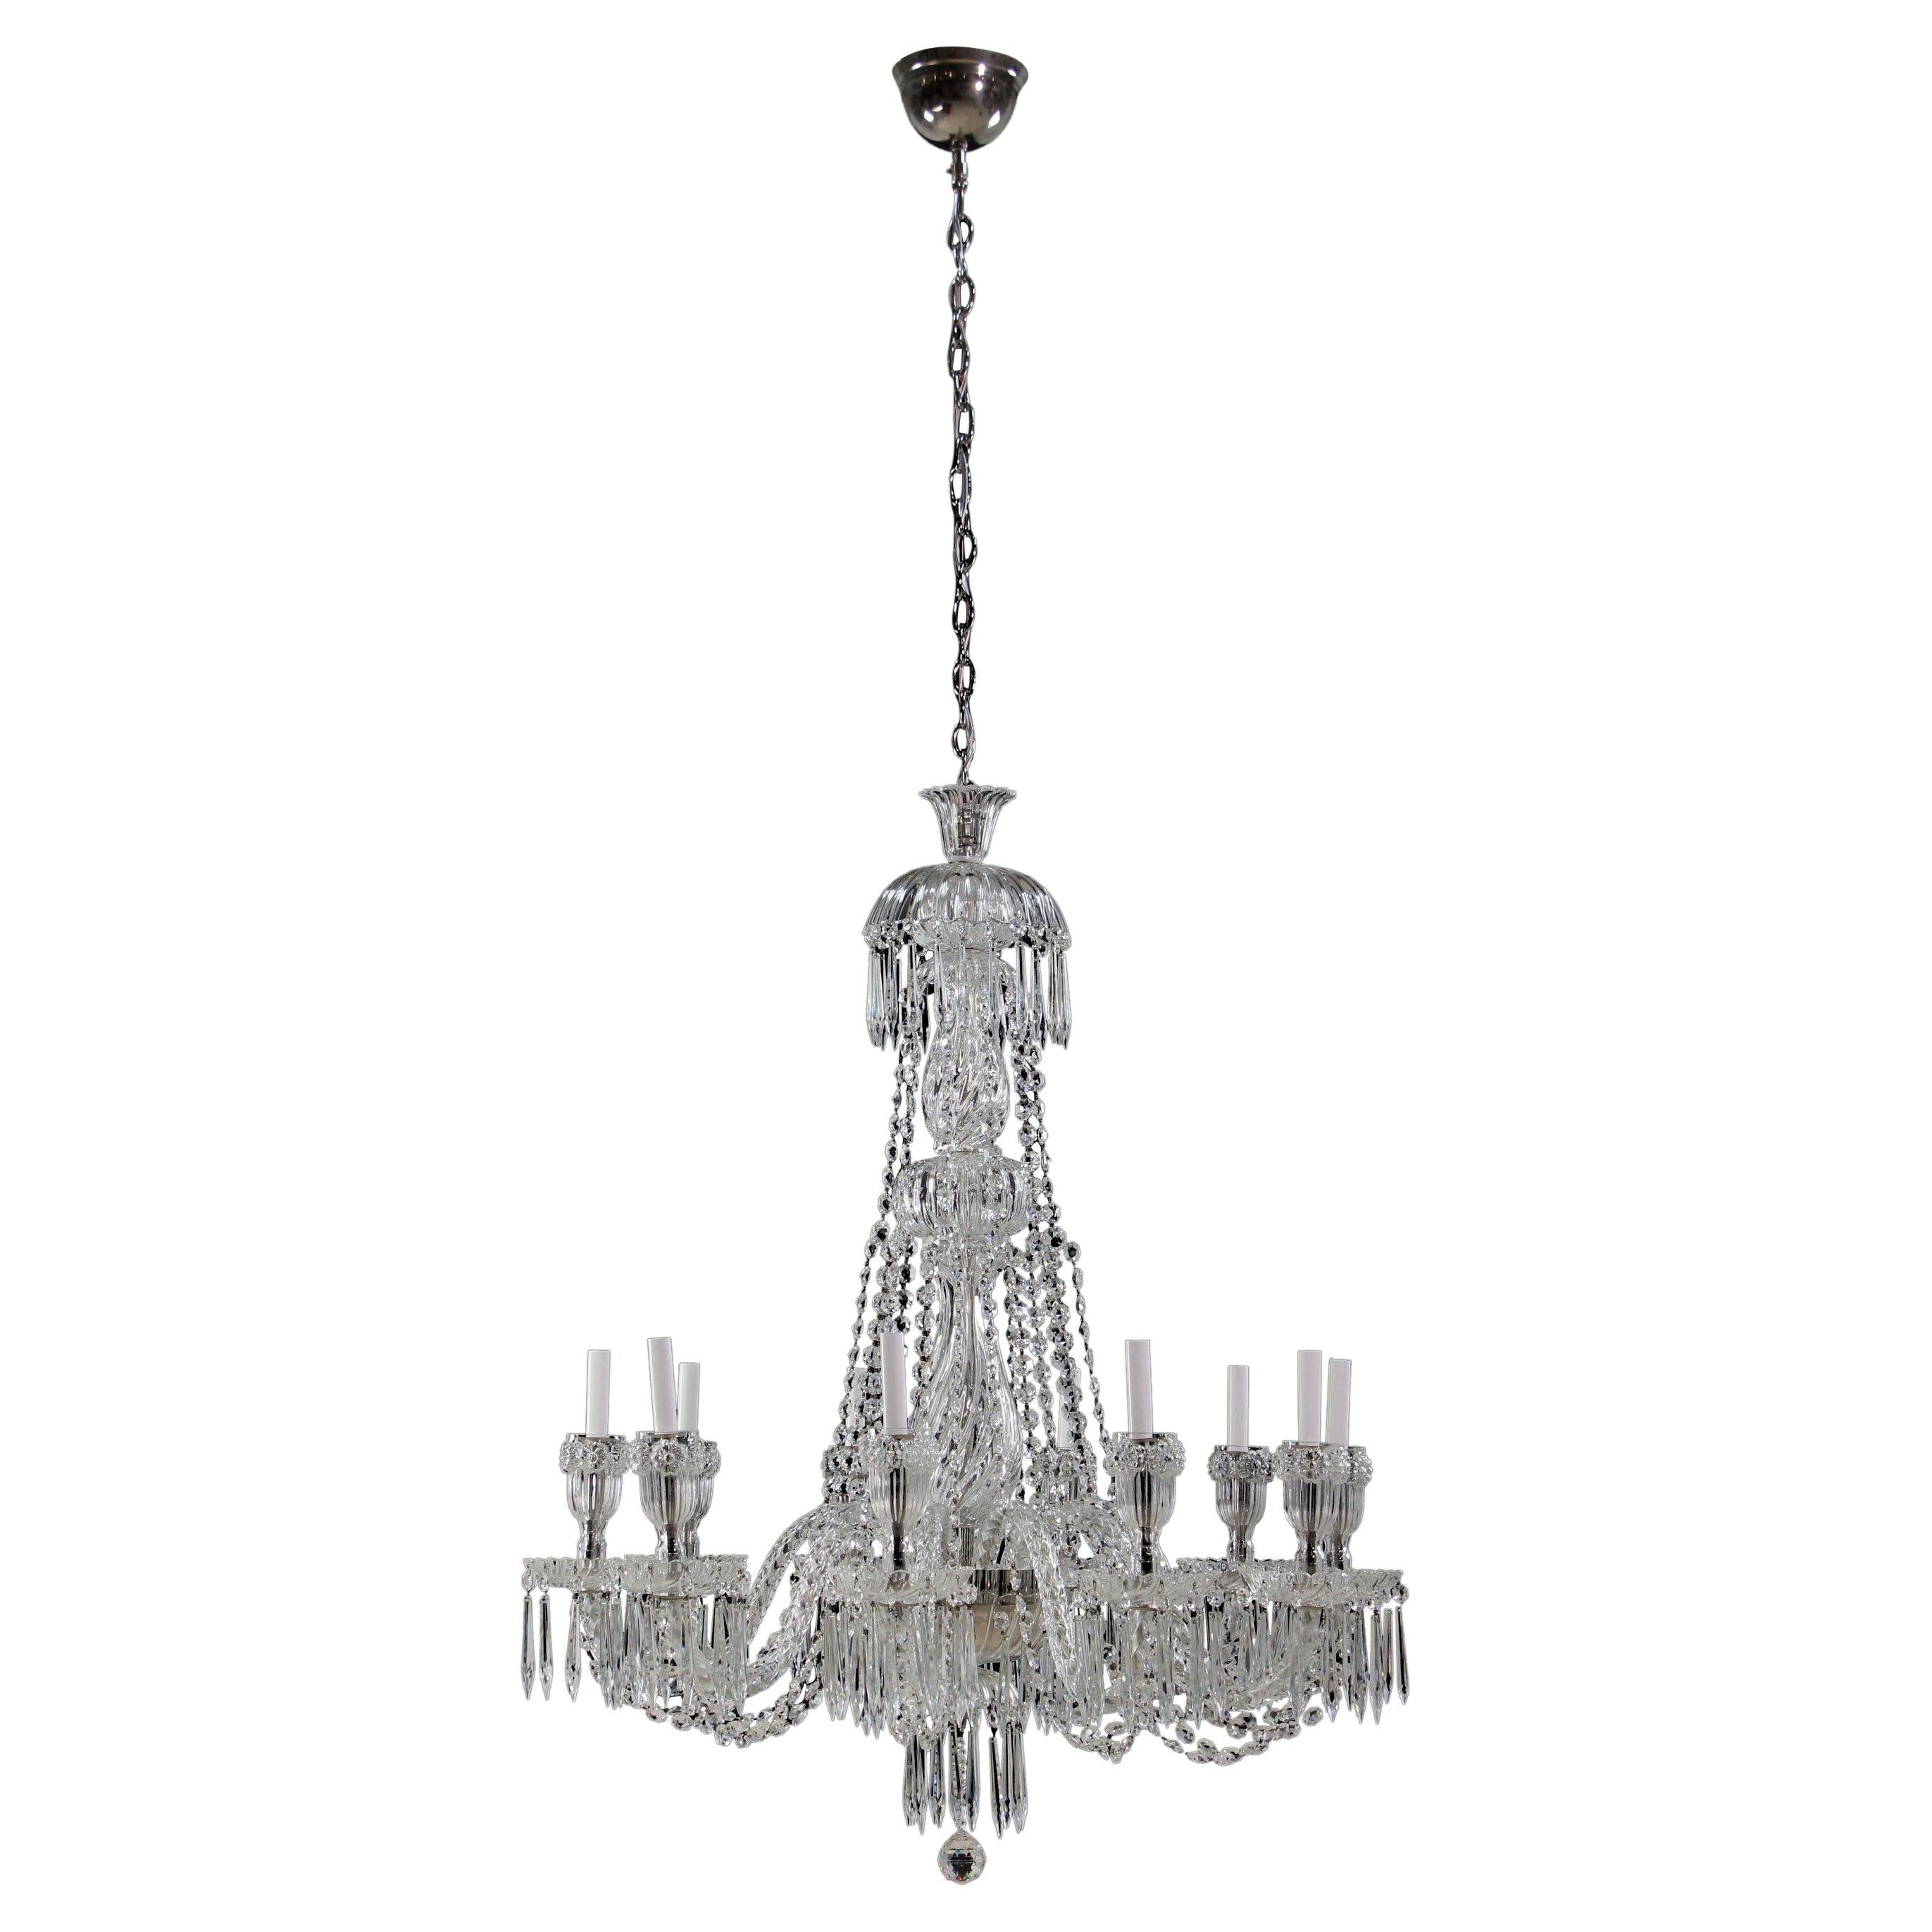 Heavily Draped Crystal Chandelier 12 Light Braided Arms